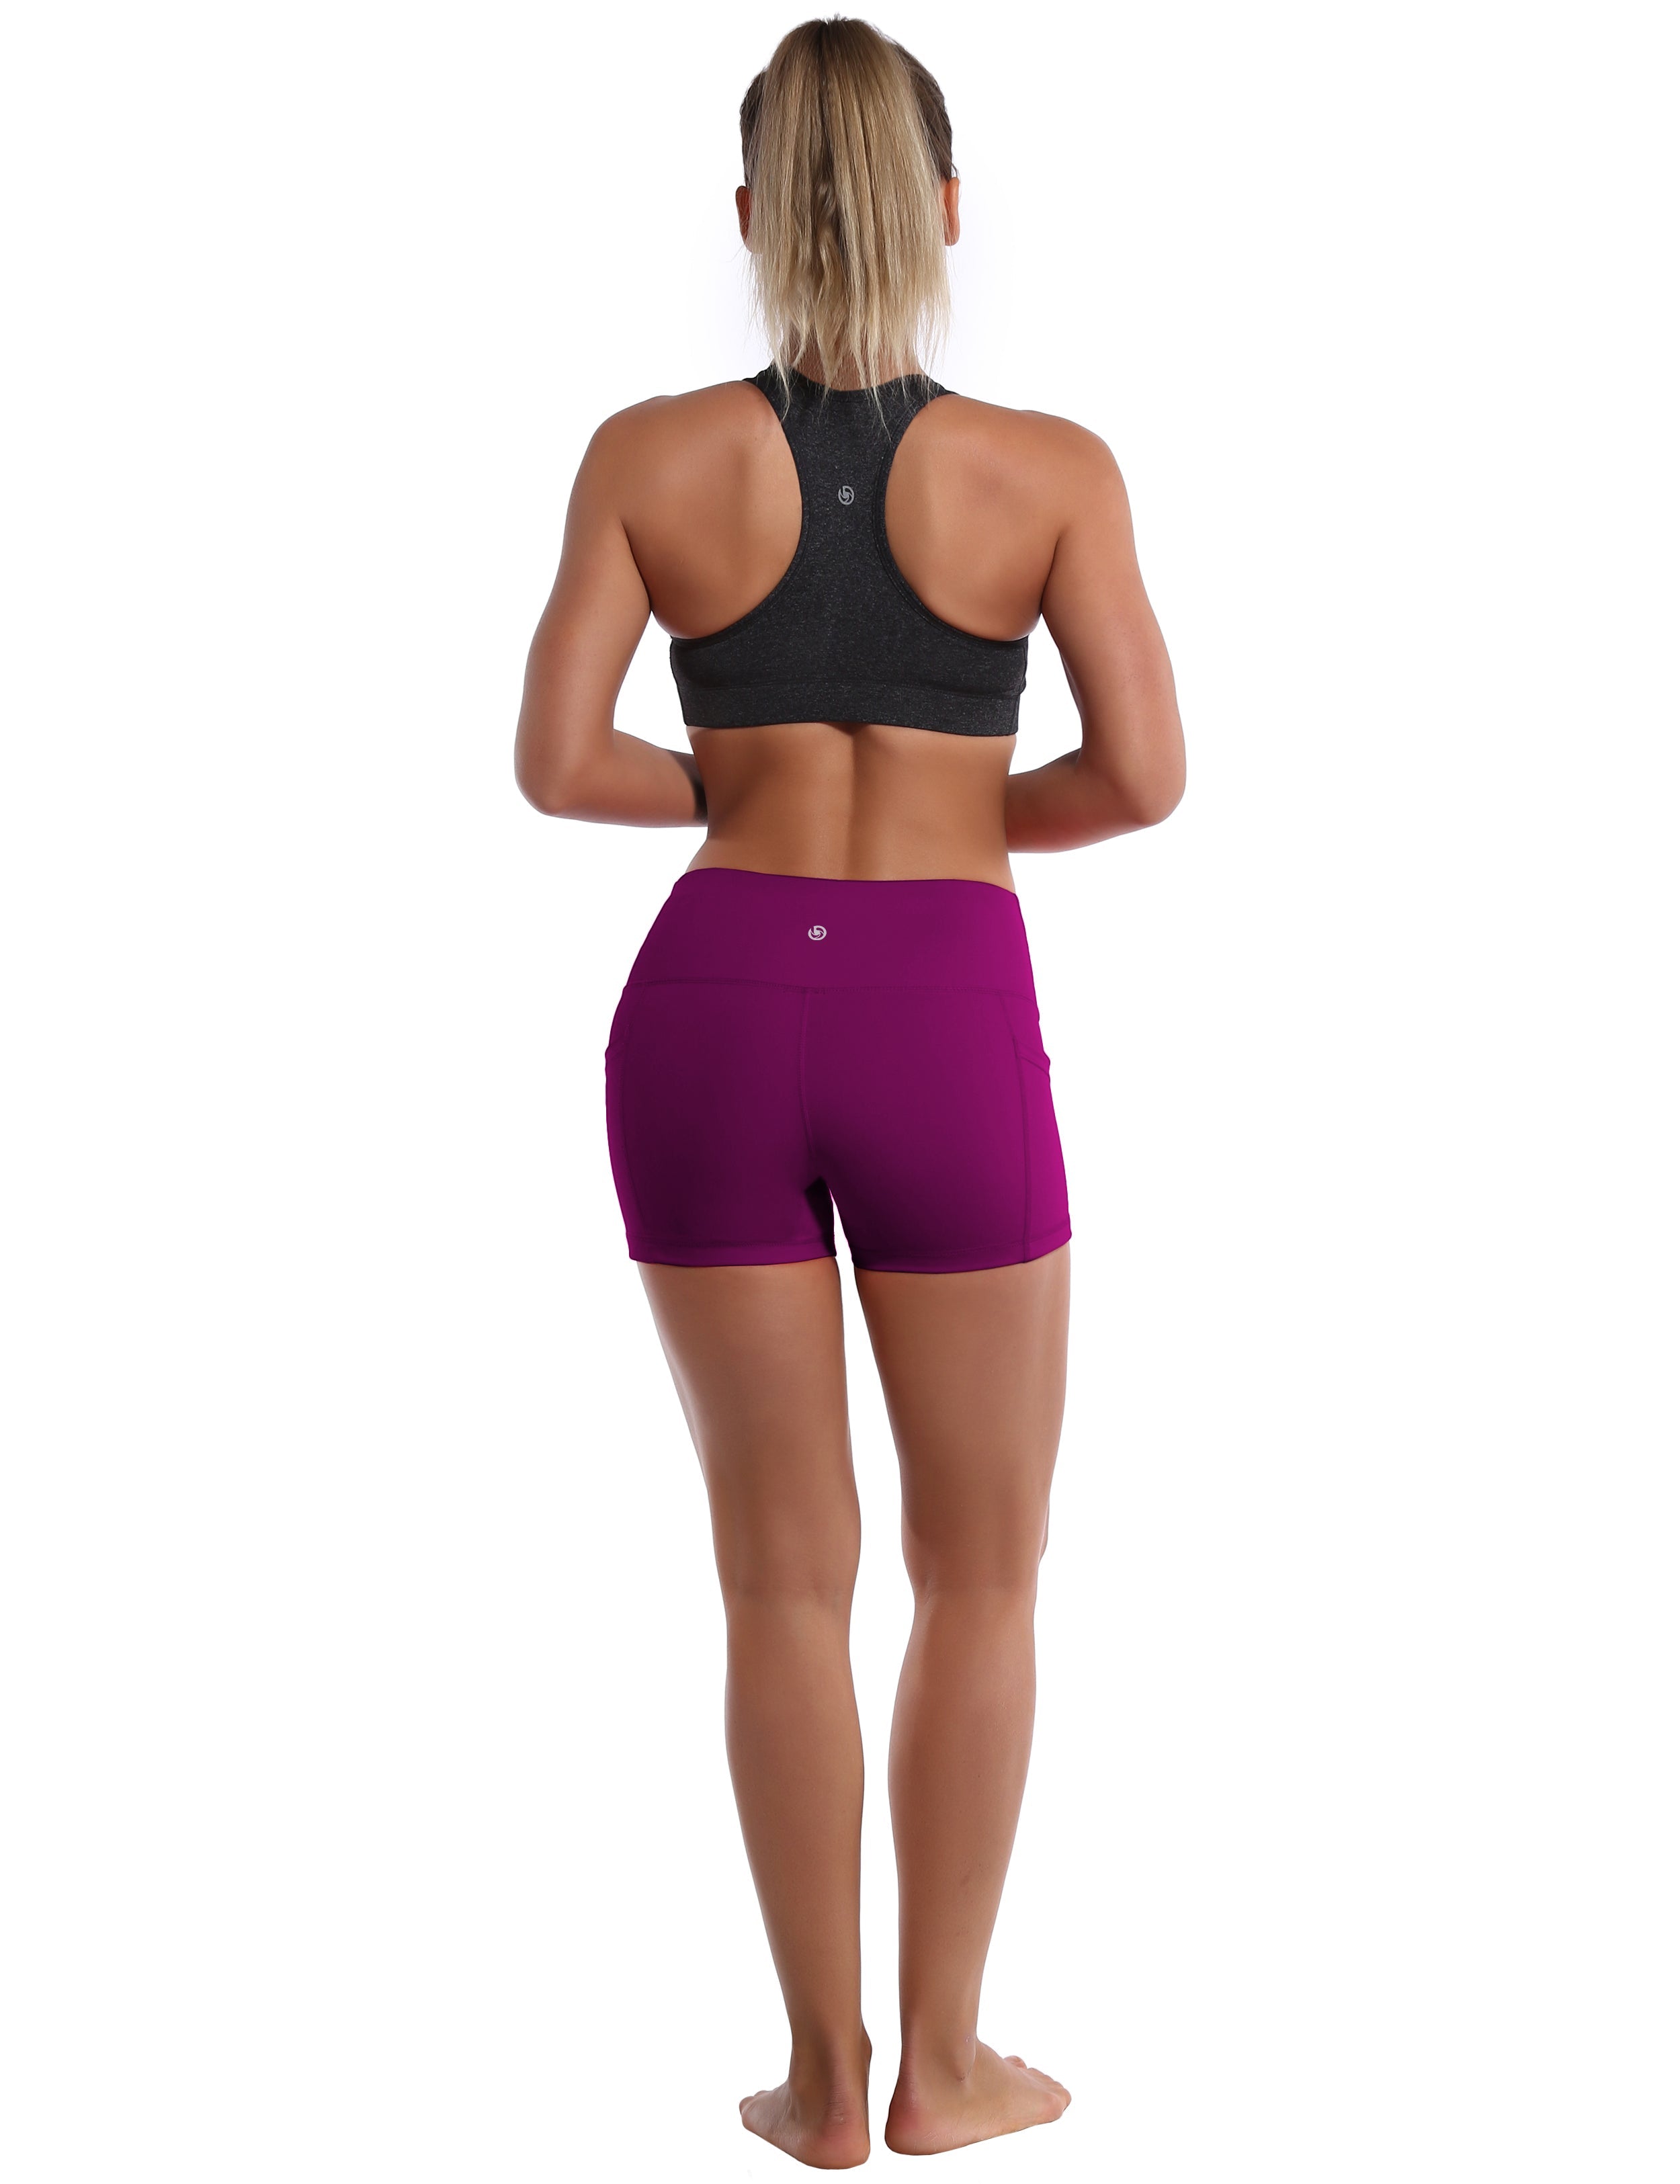 2.5" Side Pockets Yoga Shorts grapevine Sleek, soft, smooth and totally comfortable: our newest sexy style is here. Softest-ever fabric High elasticity High density 4-way stretch Fabric doesn't attract lint easily No see-through Moisture-wicking Machine wash 78% Polyester, 22% Spandex